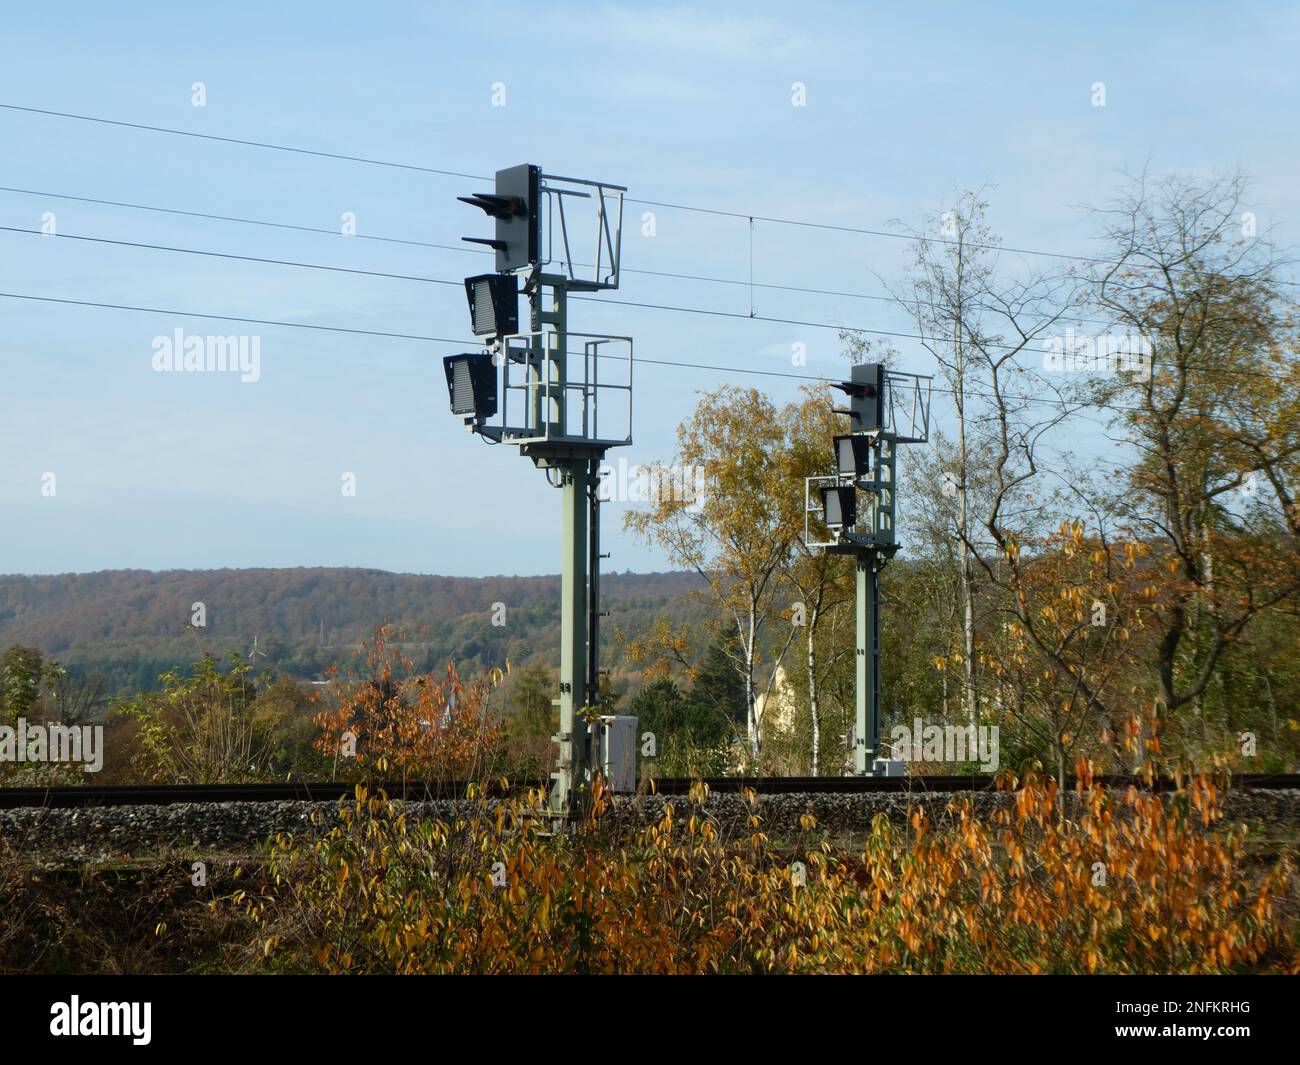 Railway signals with track in sunny autumn landscape Stock Photo